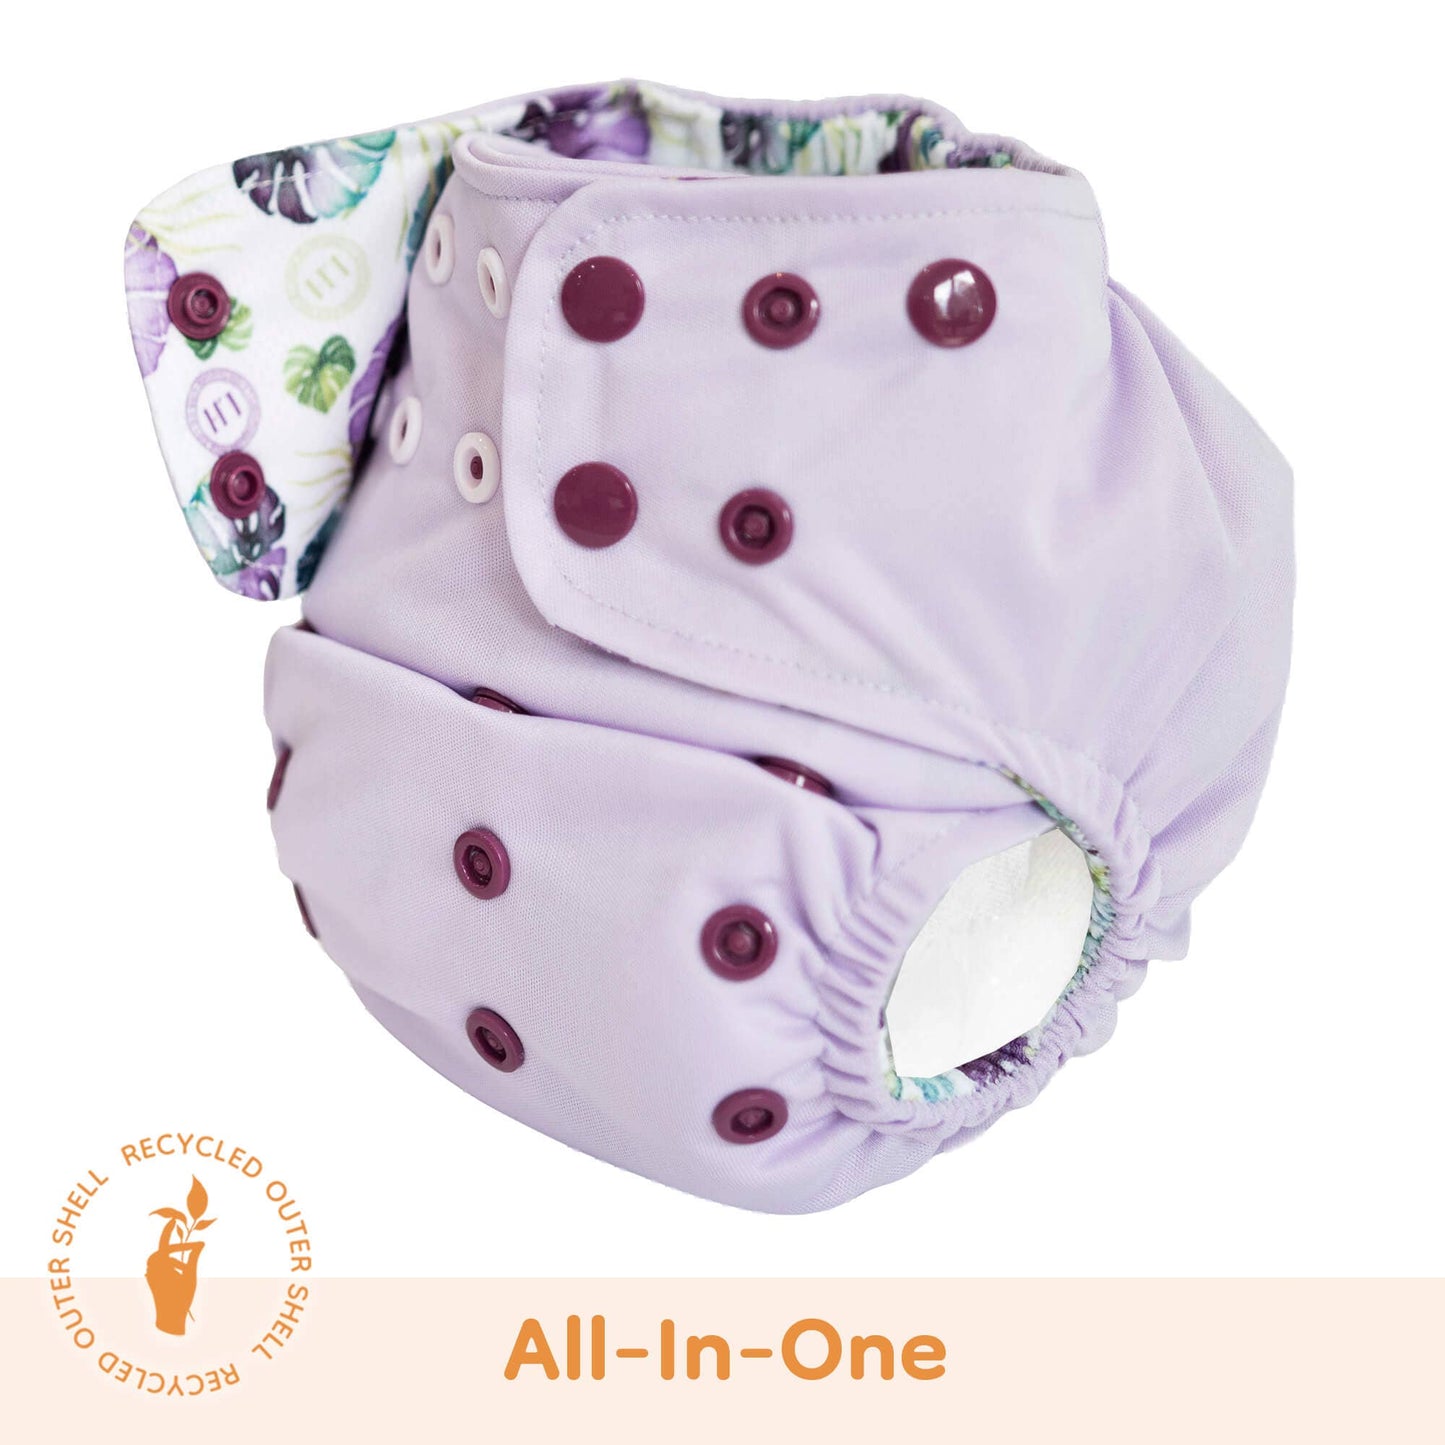 Lighthouse Kids Company | Cloth Diapers | Cloth Nappy - Cloth Diaper - All In One - Peekaboo Leaves - All Sizes